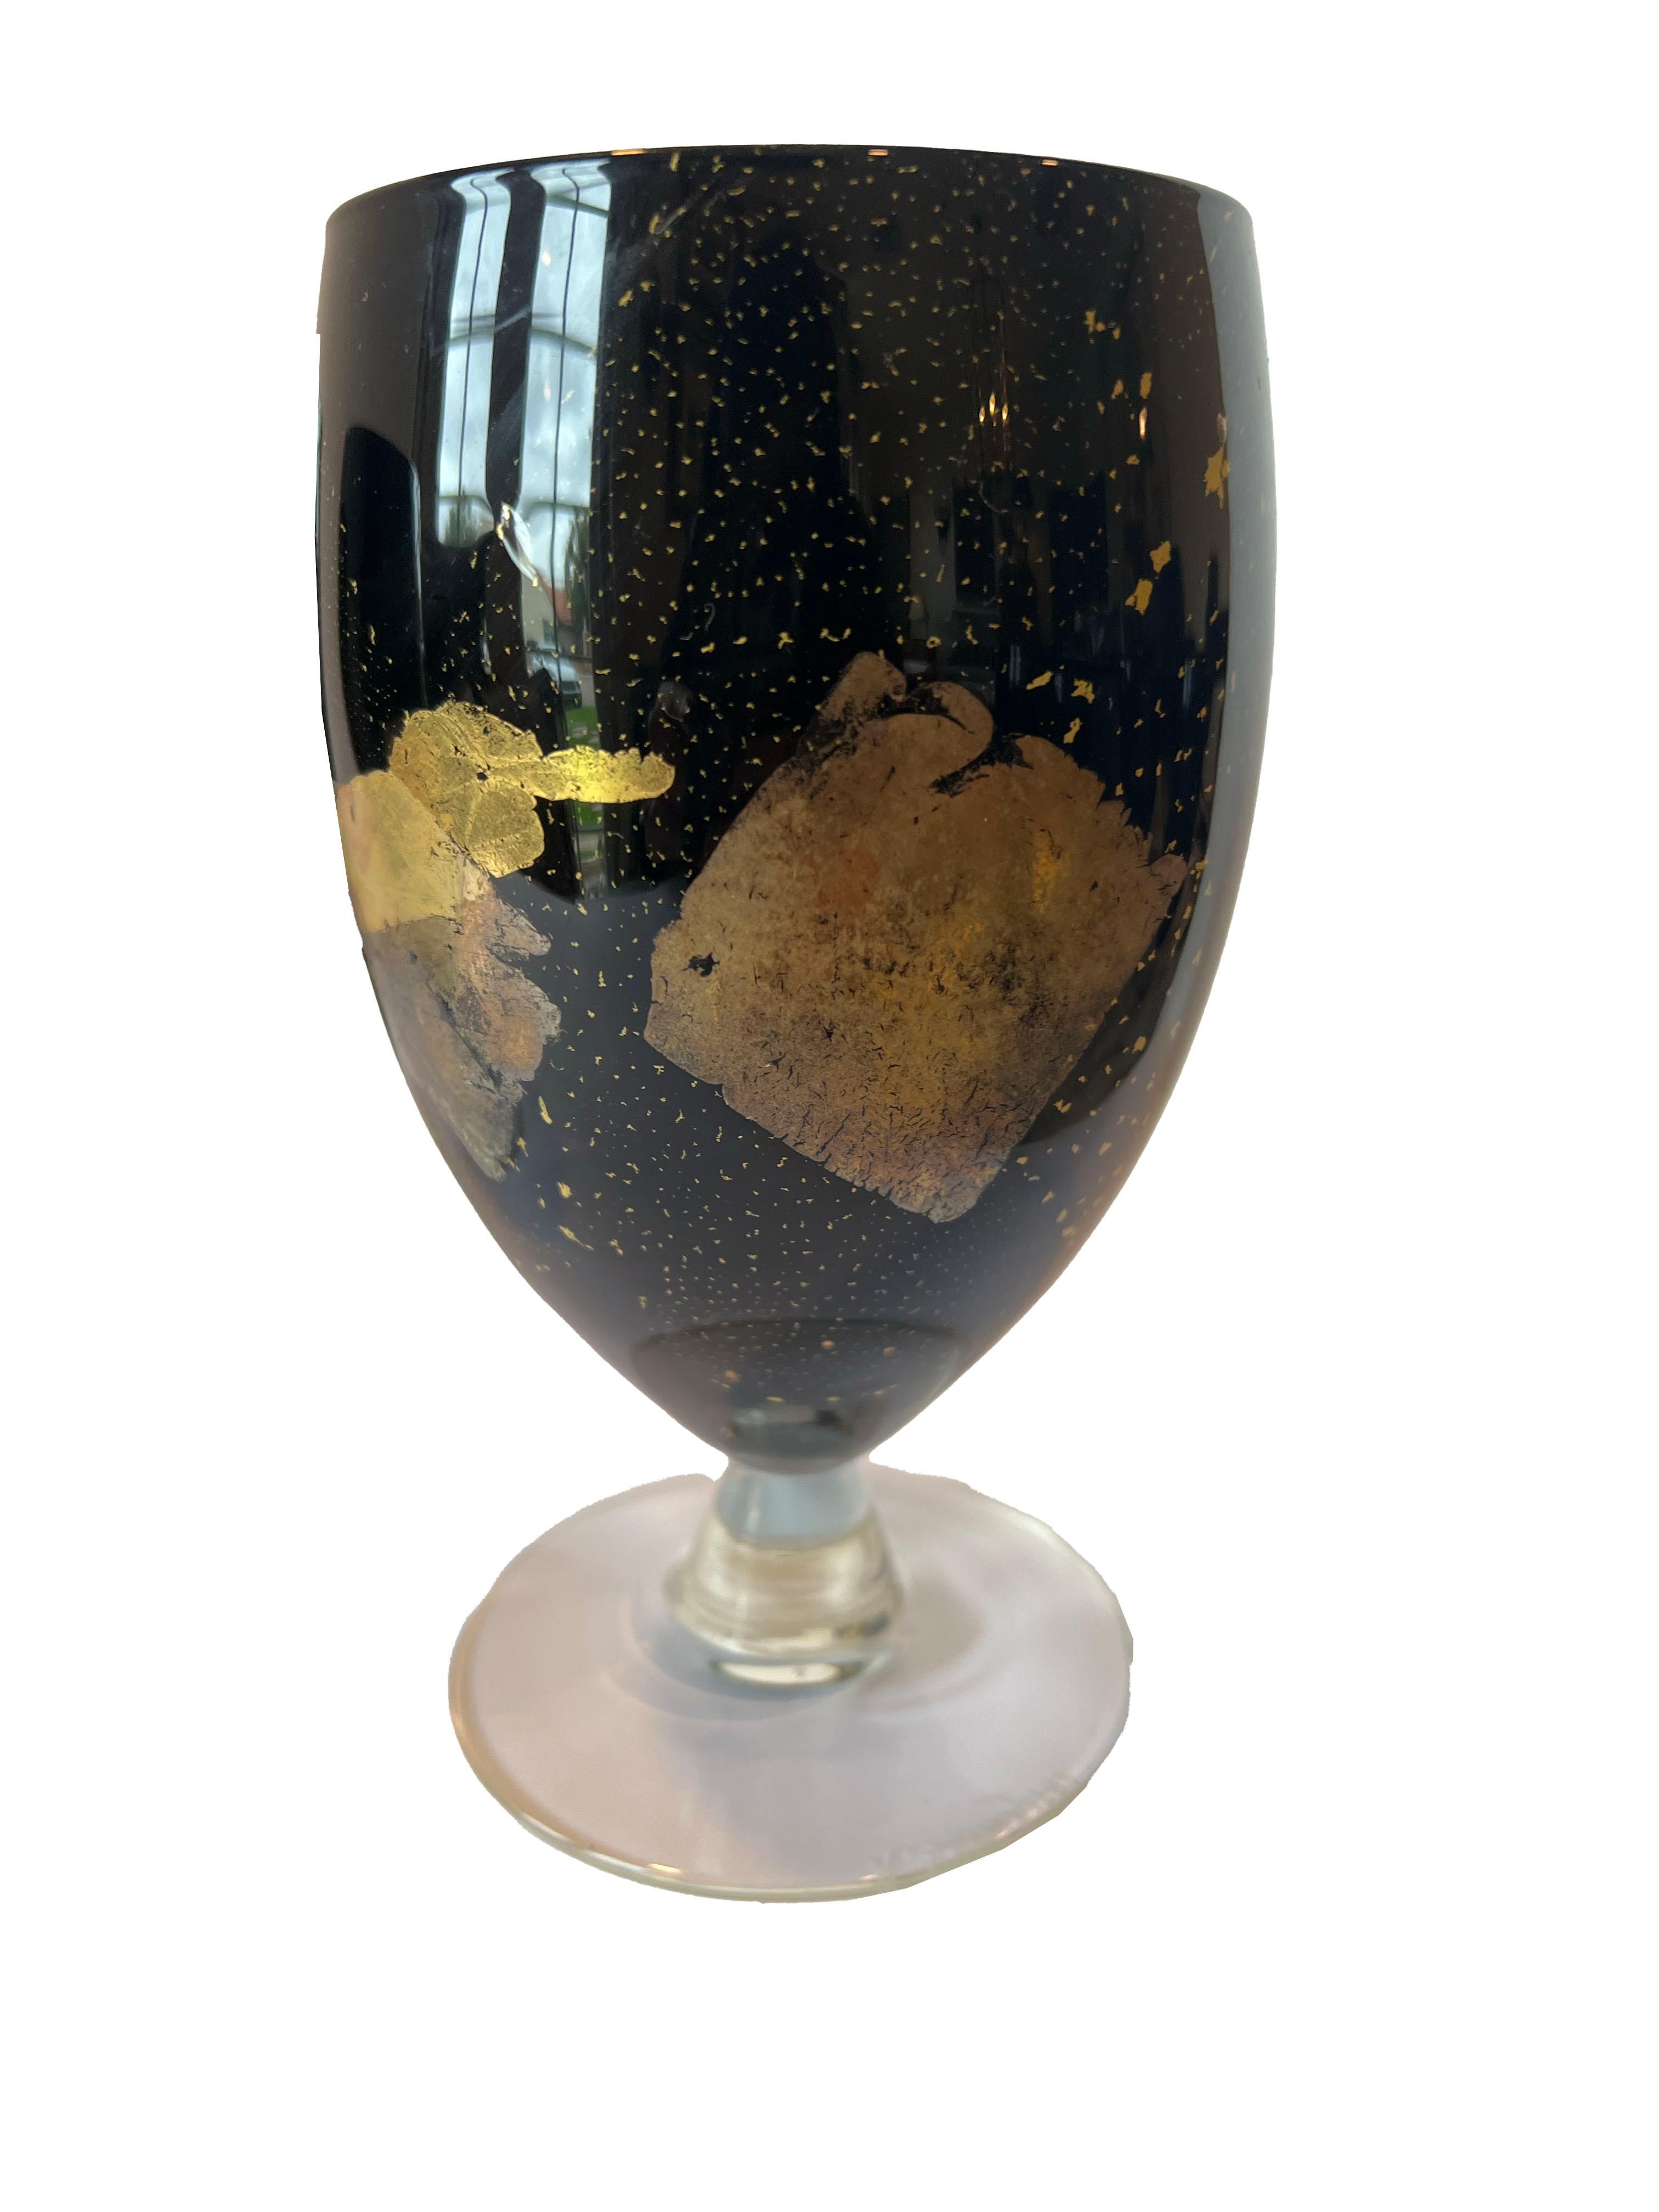 Set of 11 Black & Gold Goblets; Andre Leon Talley's Collection In Good Condition For Sale In Scottsdale, AZ